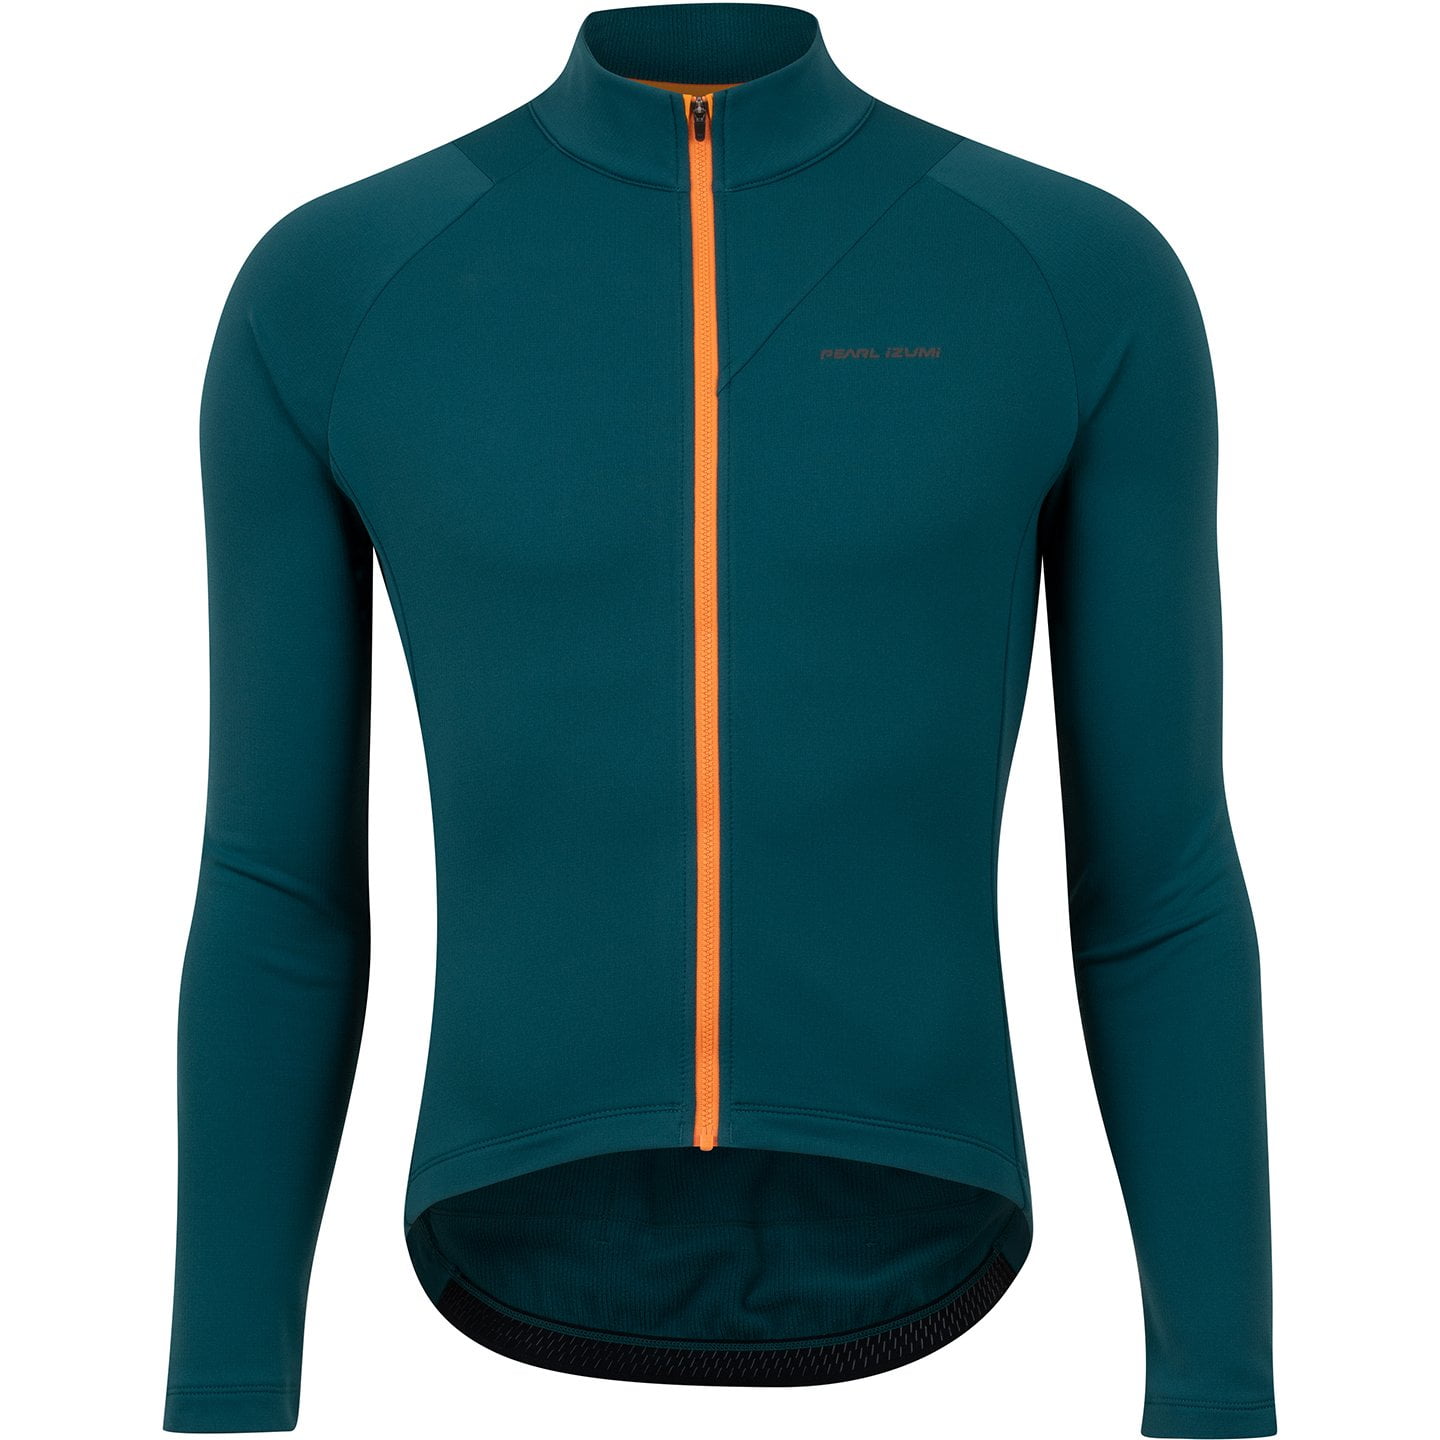 PEARL IZUMI Attack Thermal Long Sleeve Jersey Long Sleeve Jersey, for men, size 2XL, Cycling jersey, Cycle clothing